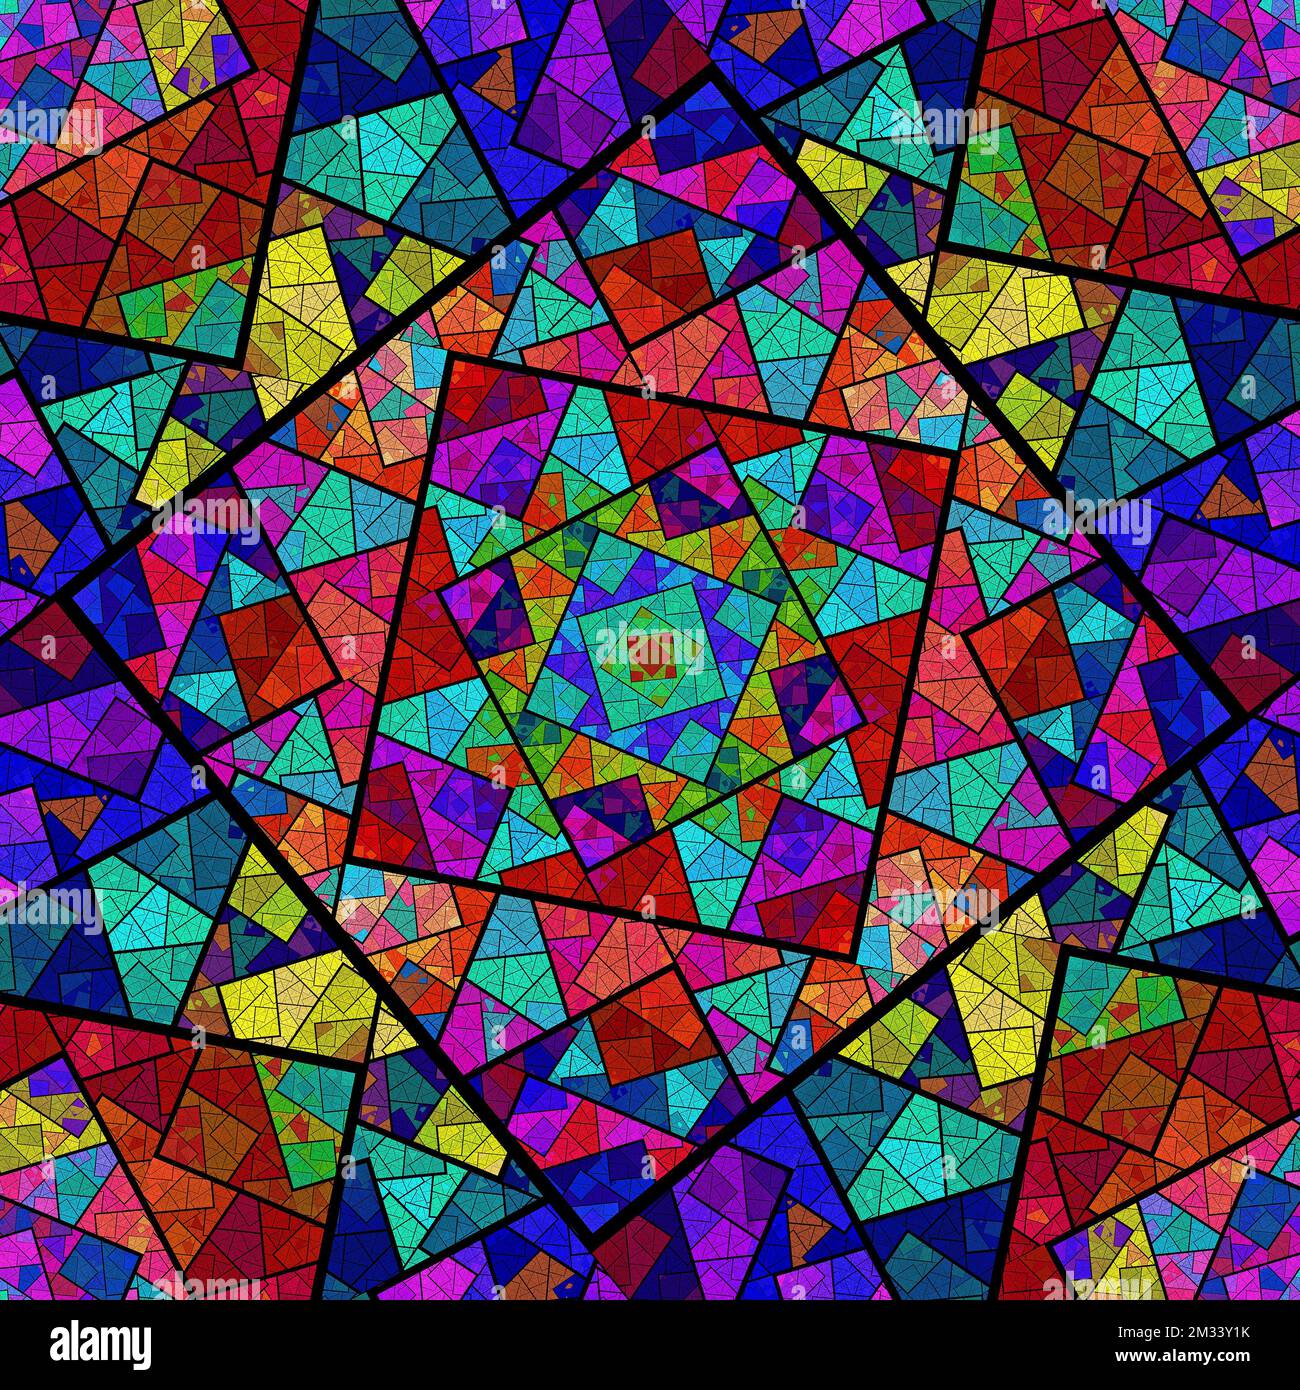 Abstract Fractal - Stained Glass Design Stock Photo